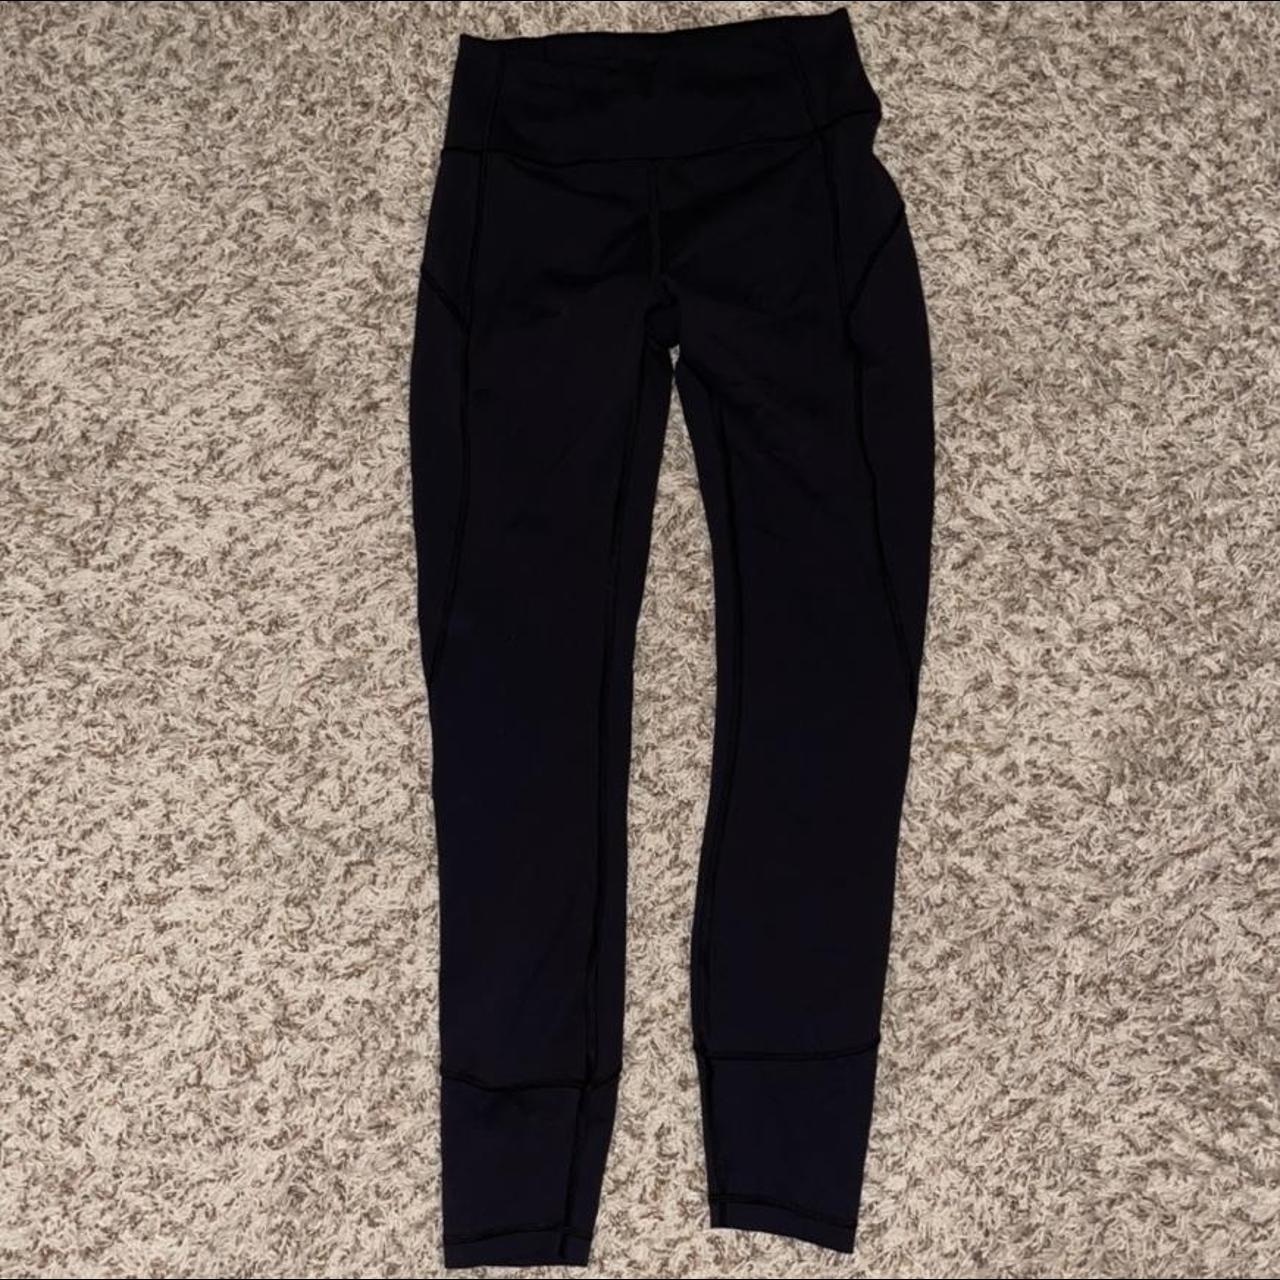 Lululemon In Movement Tight 25 with a hidden back - Depop